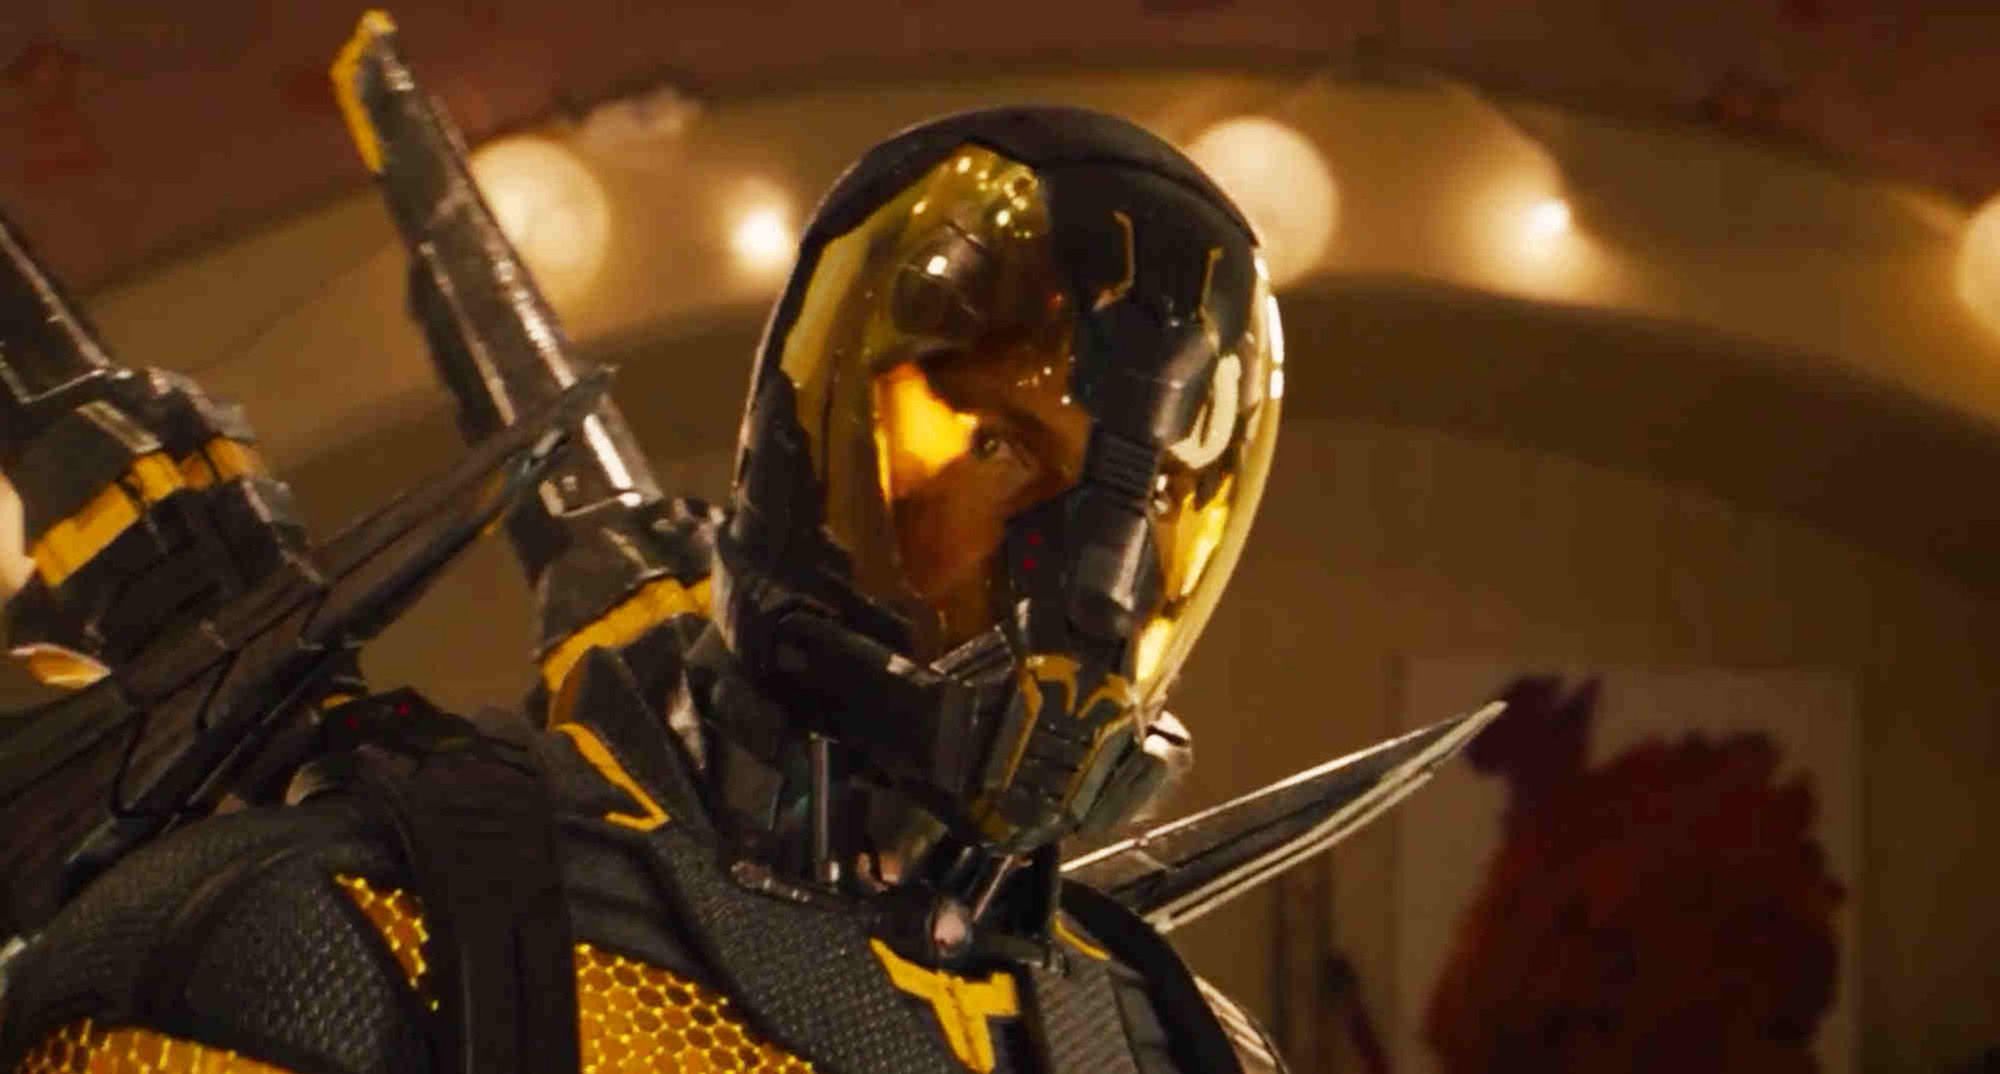 First Full Look At Actor Corey Stoll In Action As Yellowjacket In The New Marvel's Ant Man Trailer